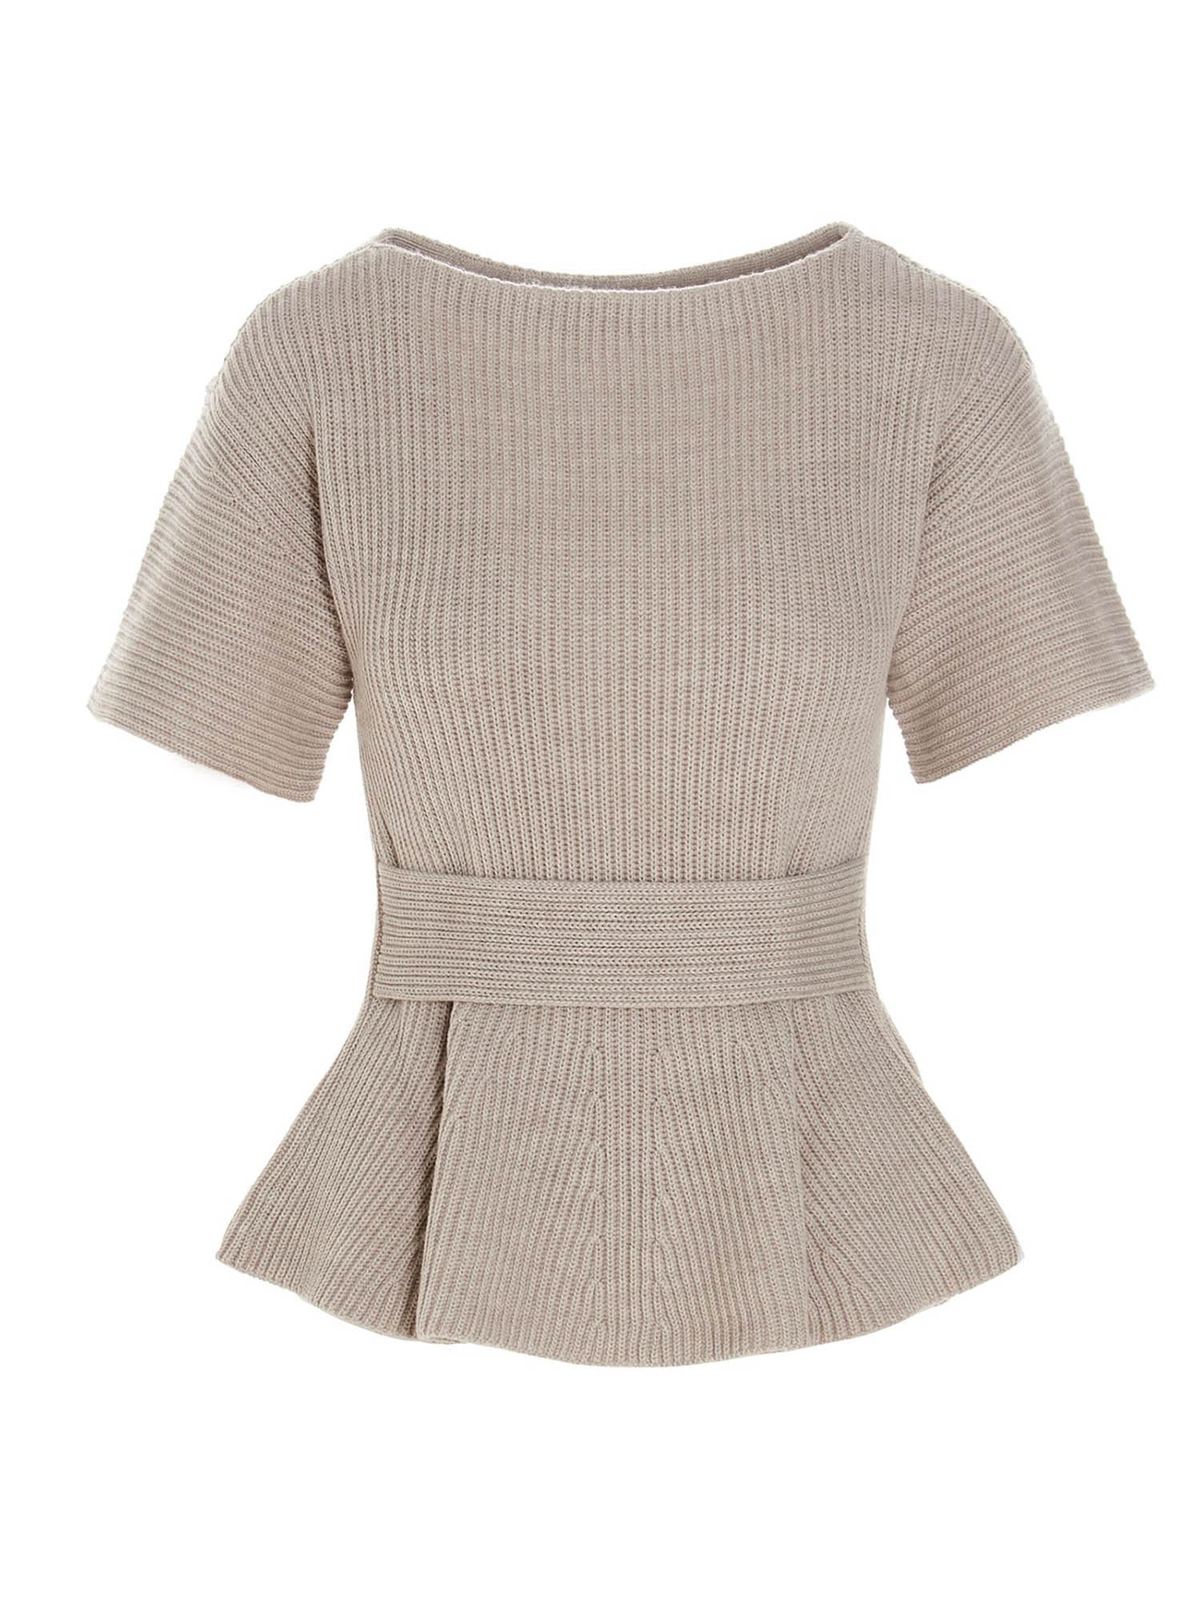 AGNONA FLARED KNITTED TOP IN SAND COLOR